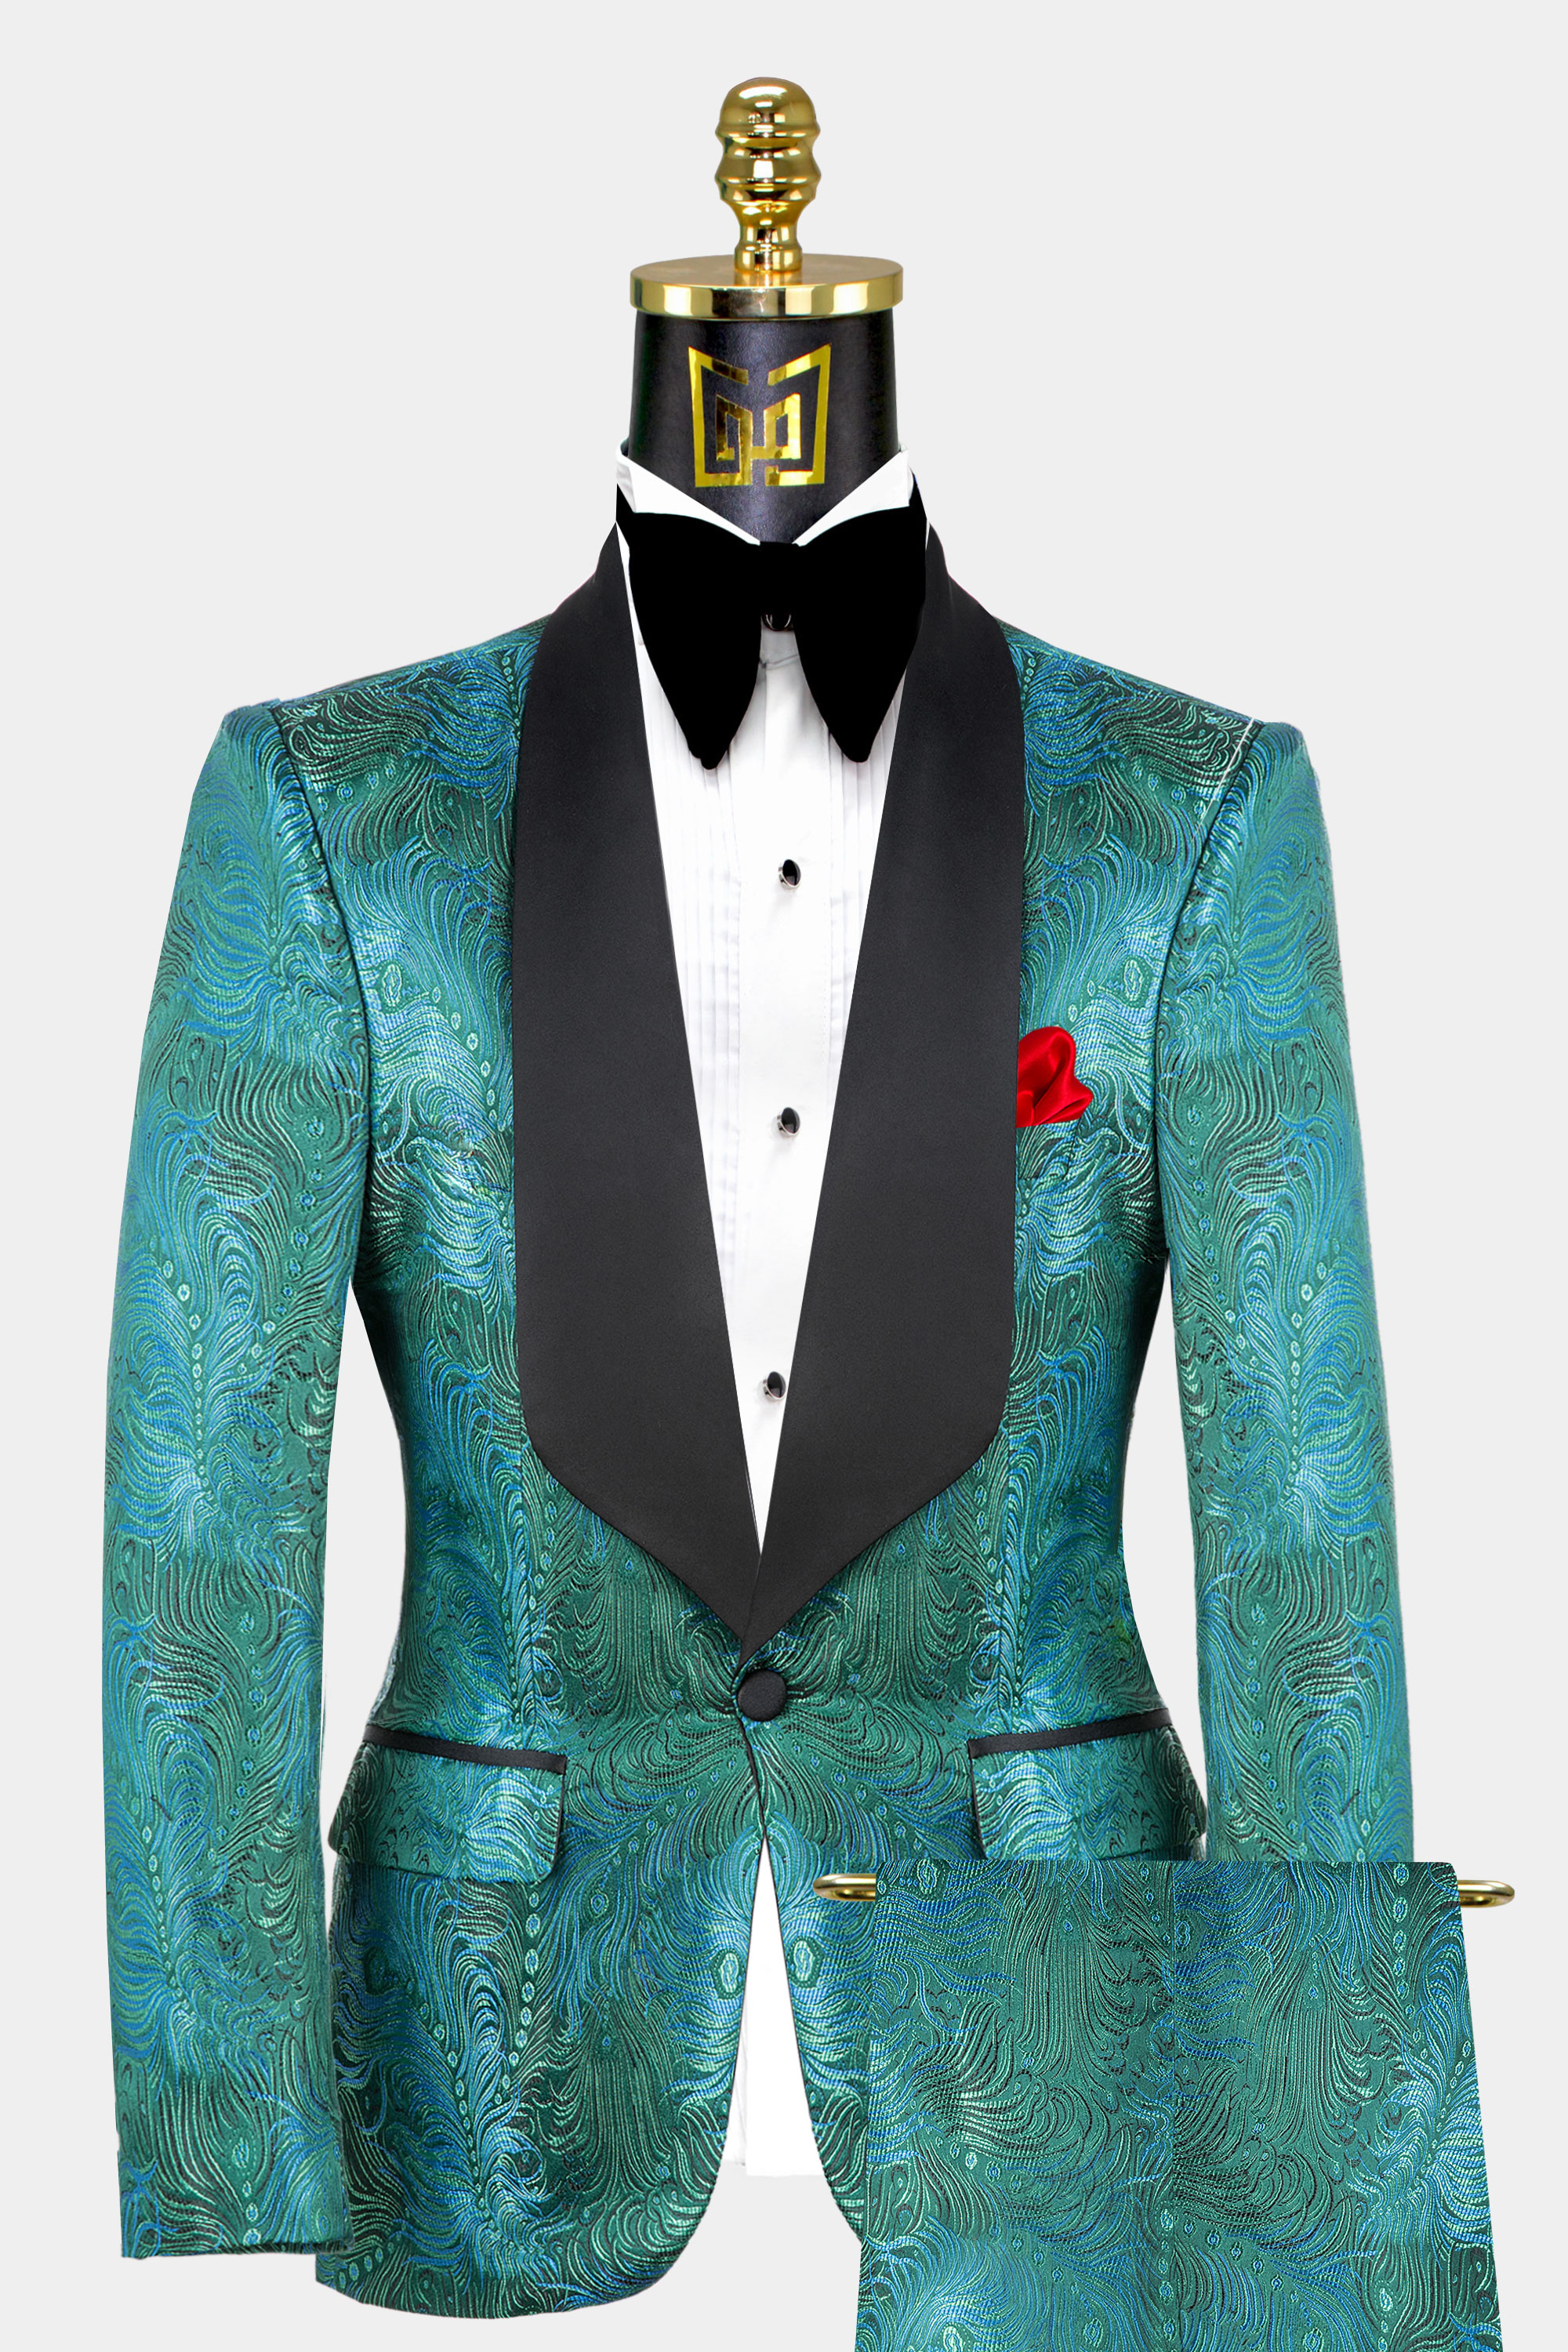 Blue Green Abstract Floral Tuxedo - 2 Piece 40r Matching Color